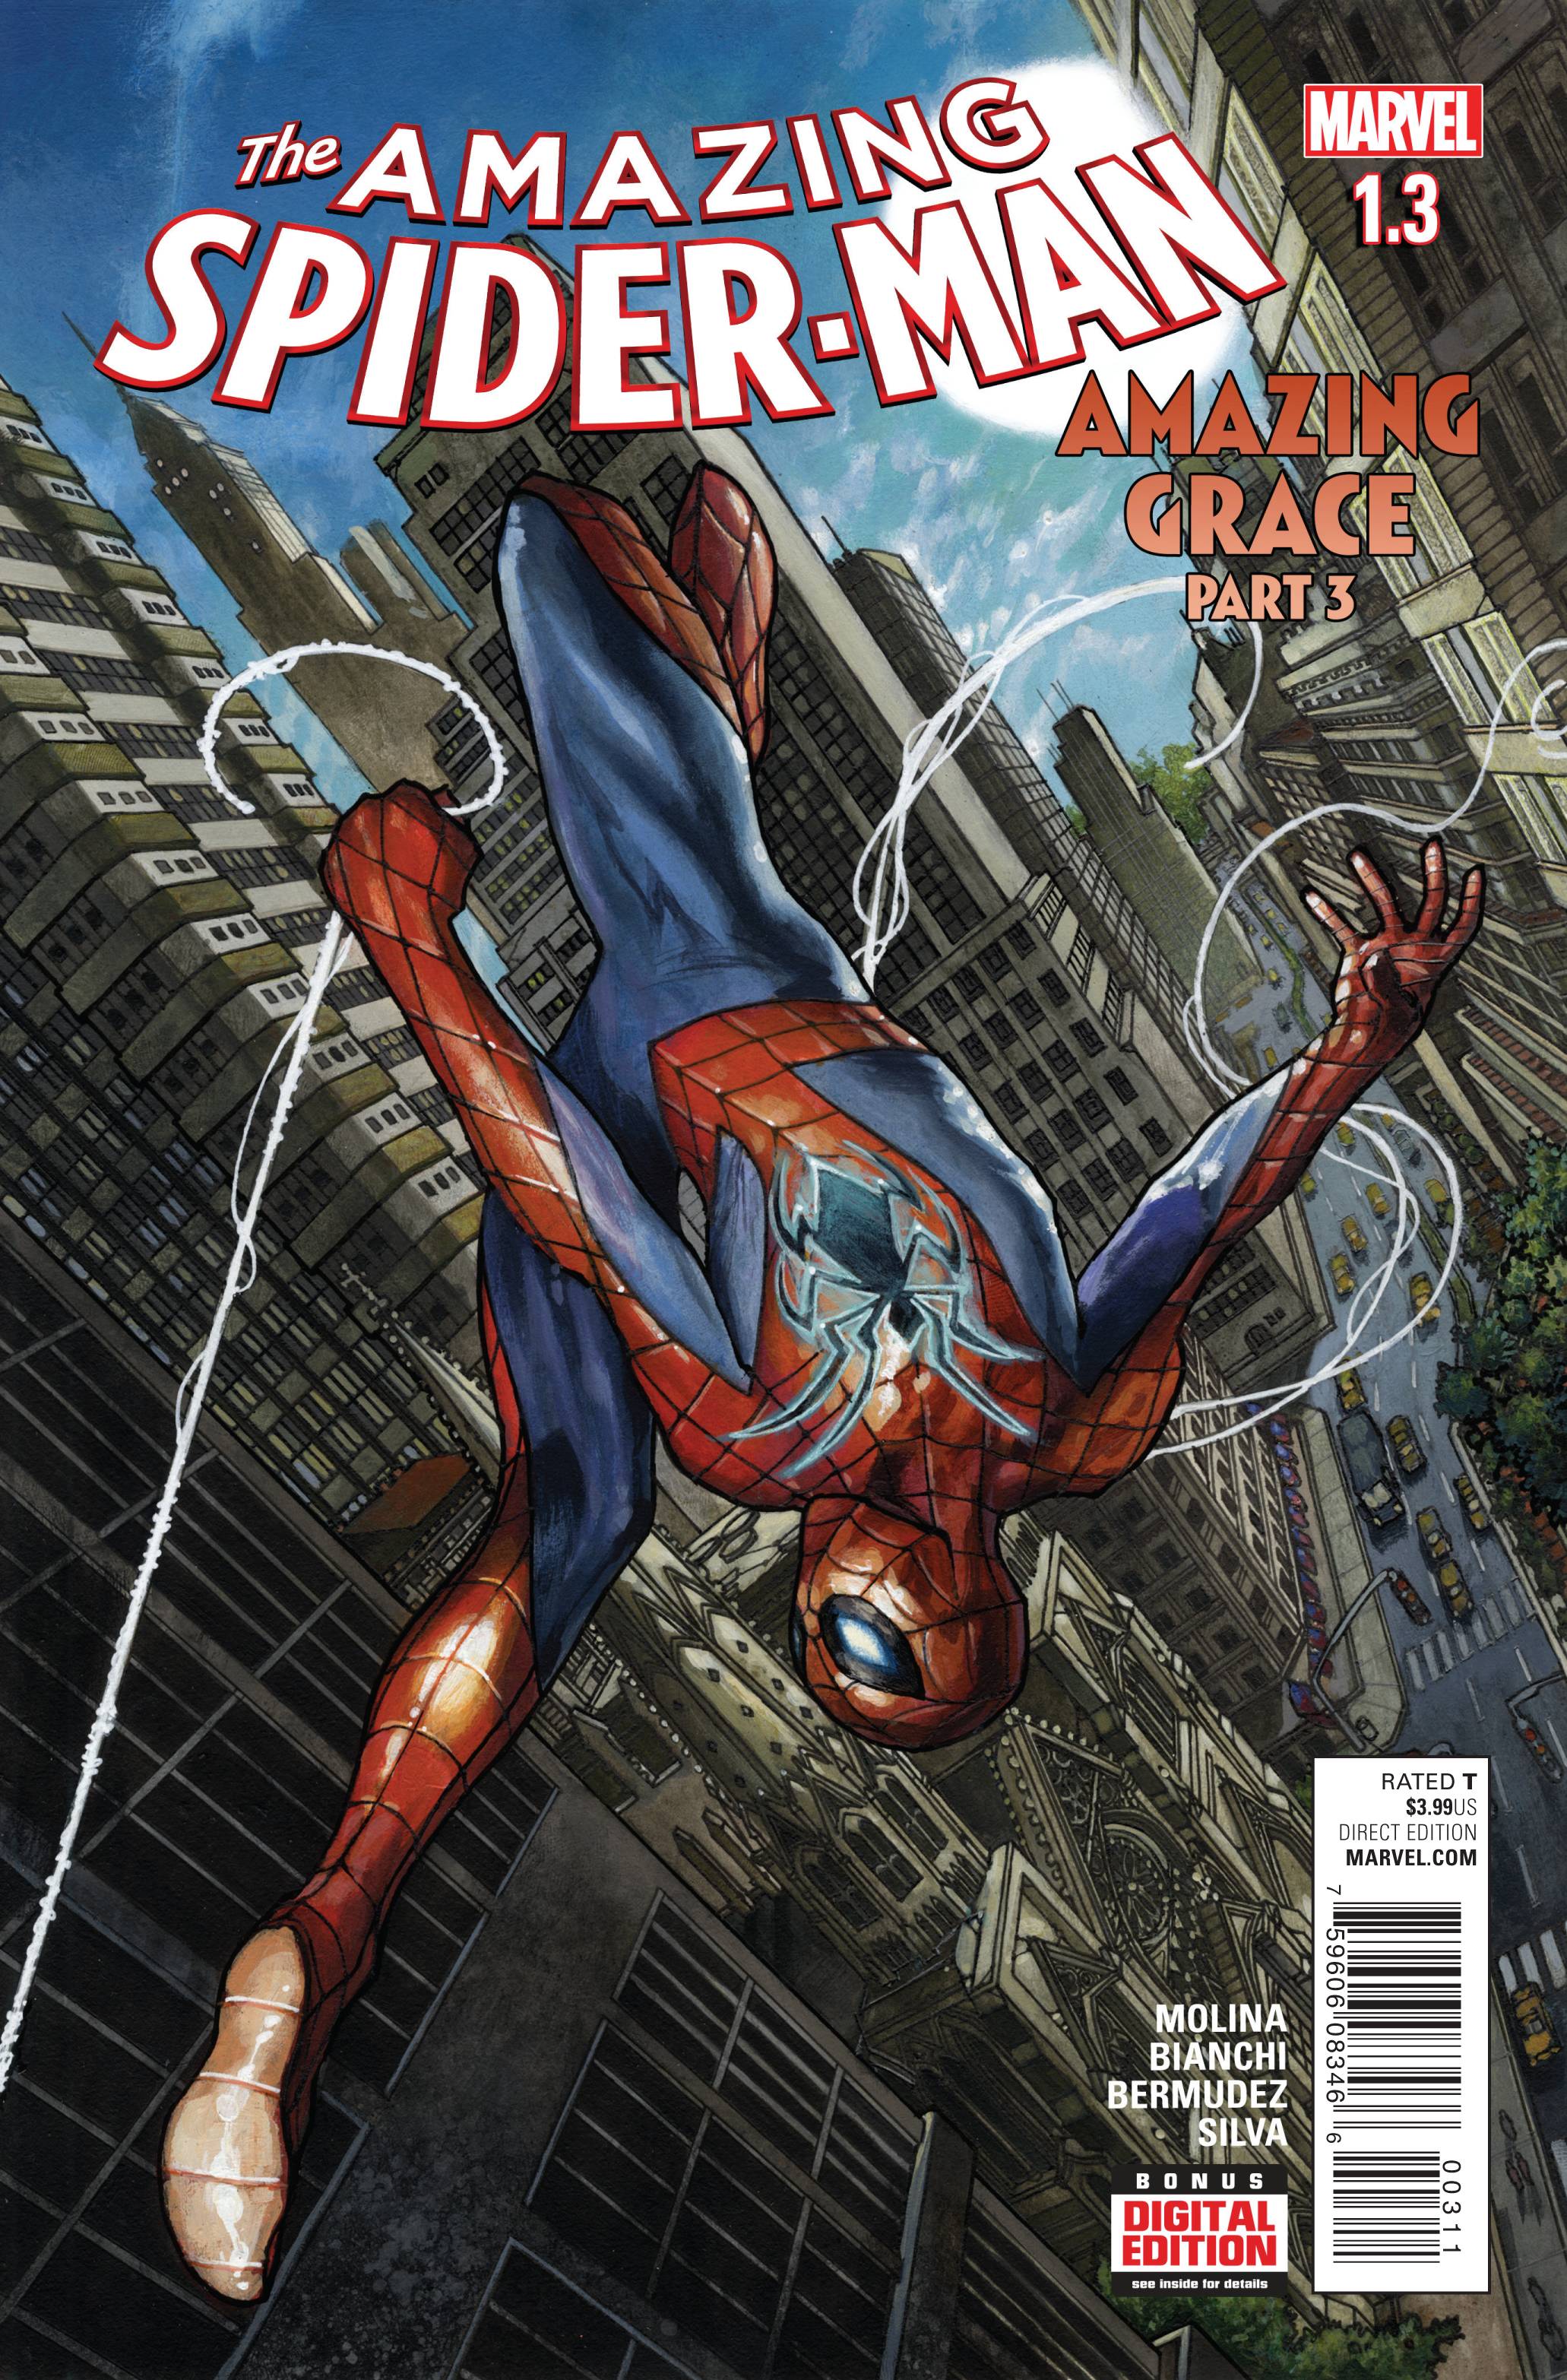 Amazing Spider-Man, The (4th Series) comic issue 1.3